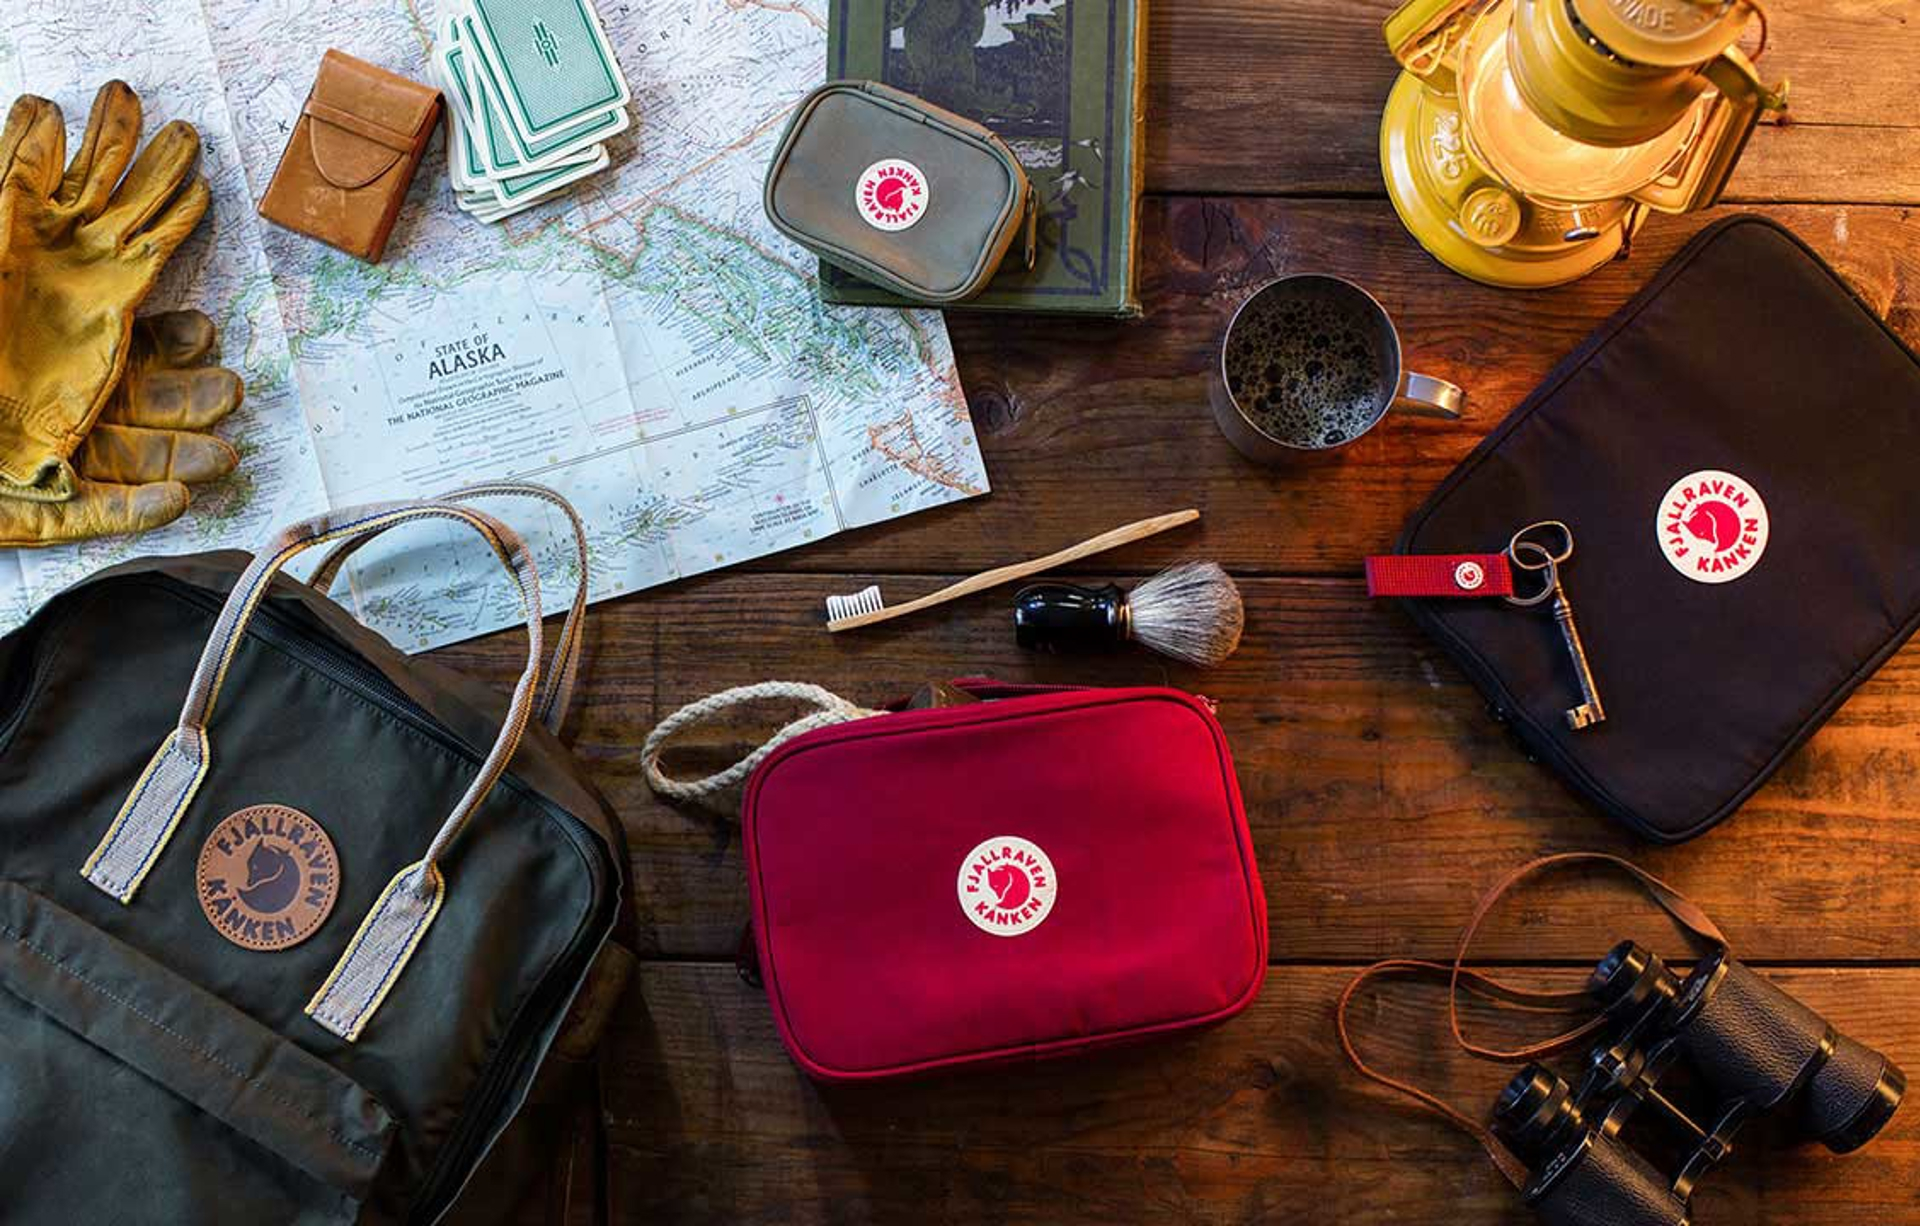 fjallraven kanken accessory bags with shaving brush, tooth brush, key, mug, lantern,  a book and a map on a table